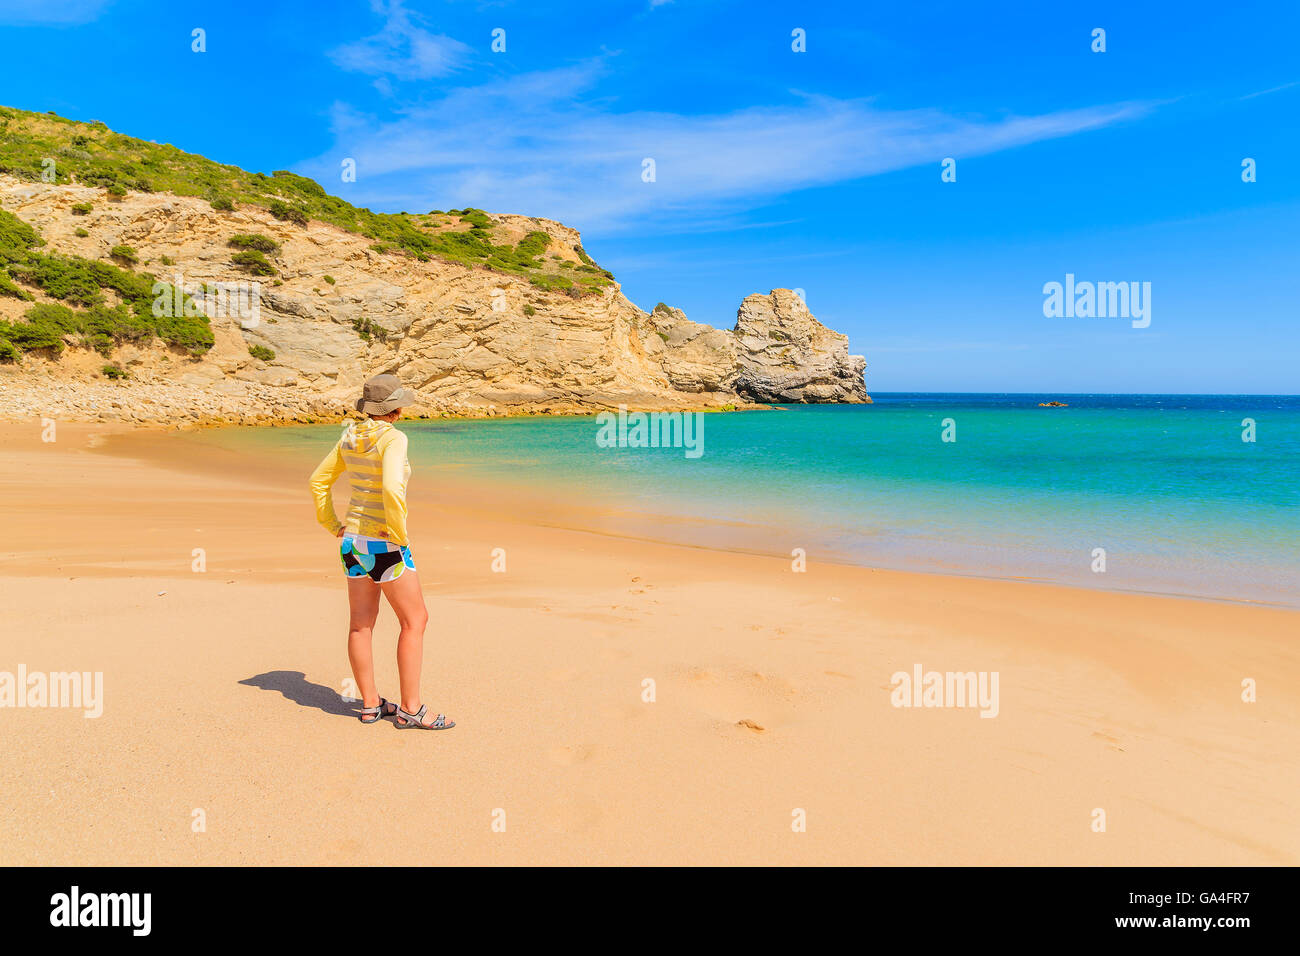 Young woman tourist standing on beautiful sandy beach in Algarve region, Portugal Stock Photo